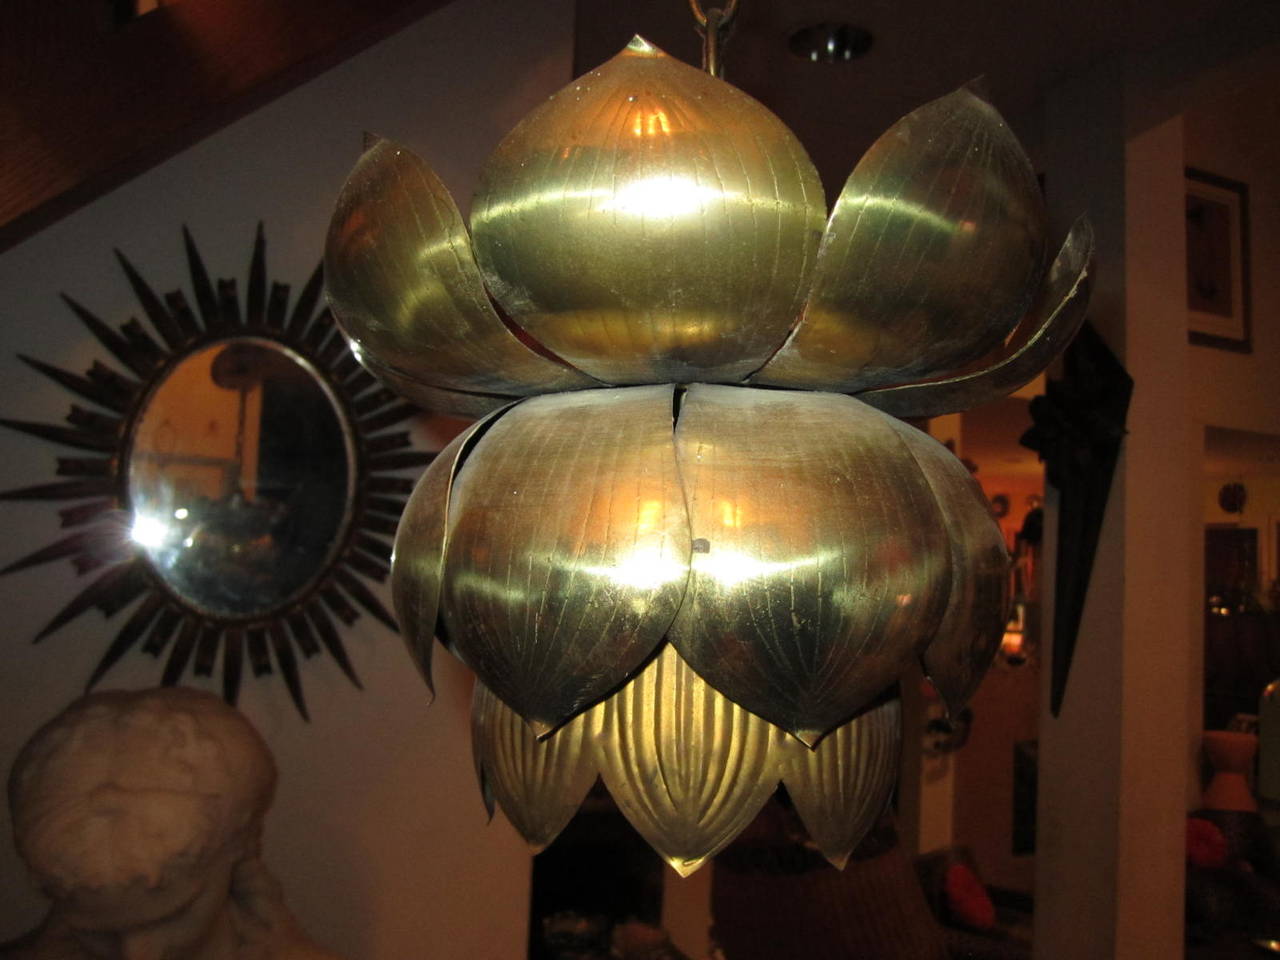 Long a symbol of purity, beauty and rebirth this lotus shaped brass pendant light is an enlightened addition to your home. Great in a hallway, entrance way or swanky powder room. High styled mood lighting for any spot that needs some vintage